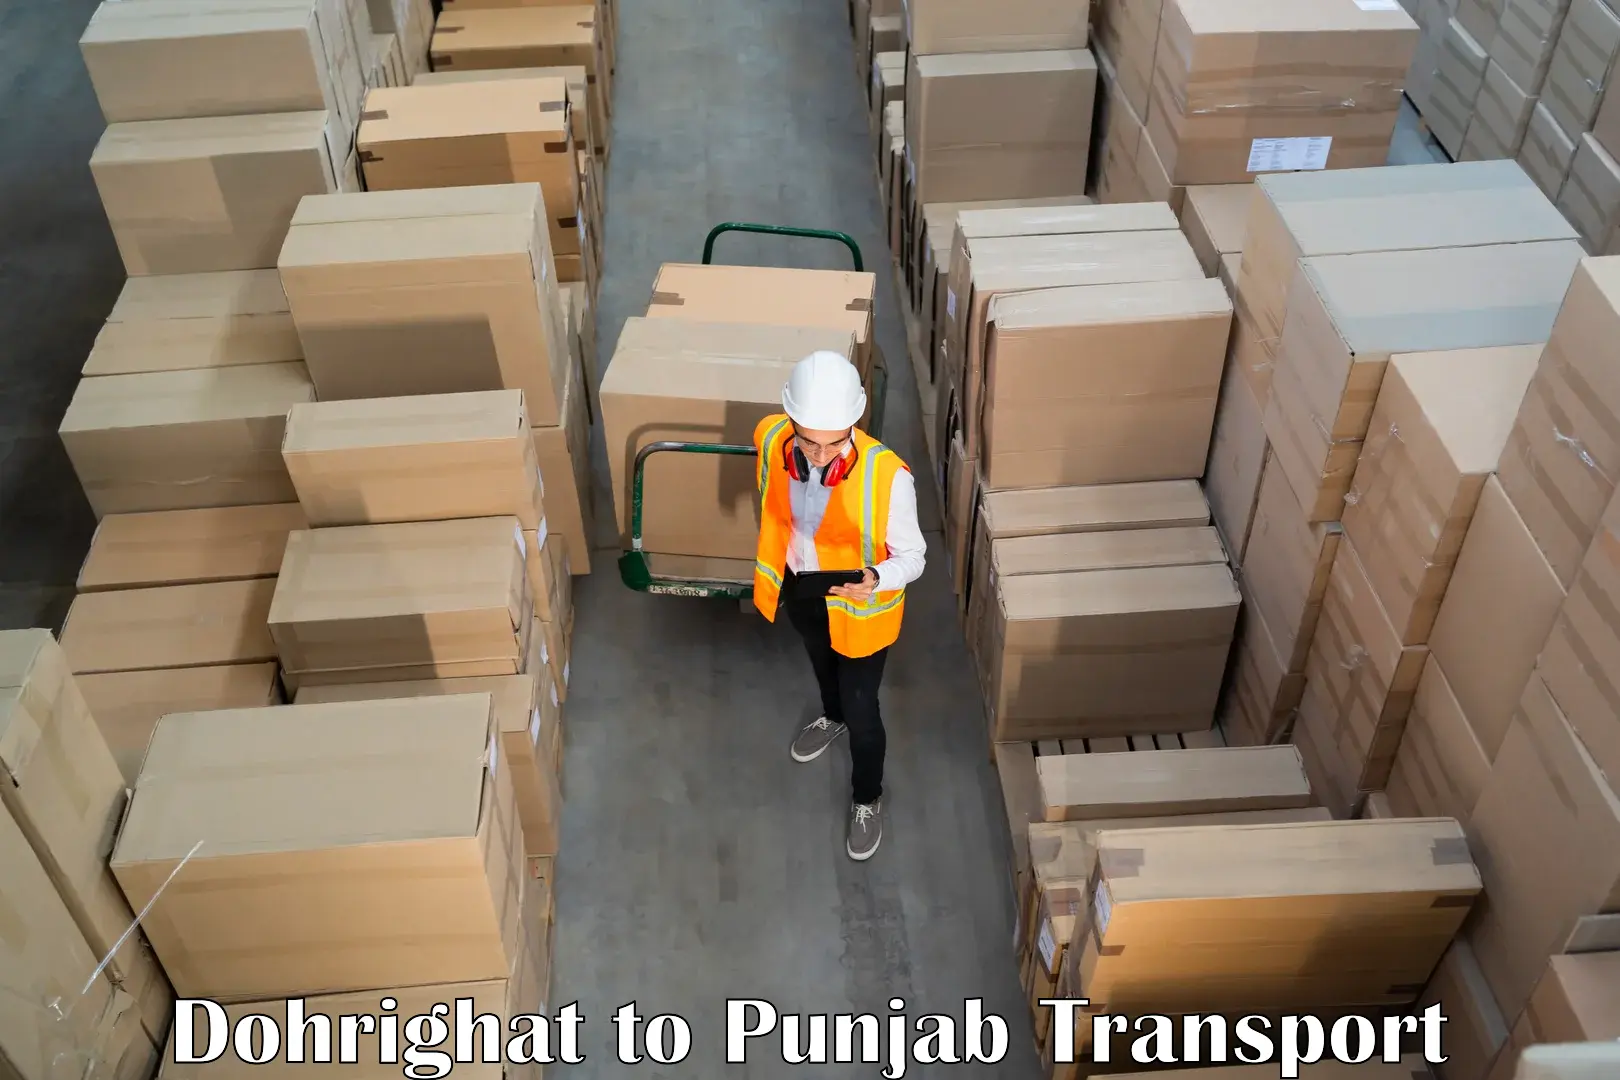 Truck transport companies in India Dohrighat to Punjab